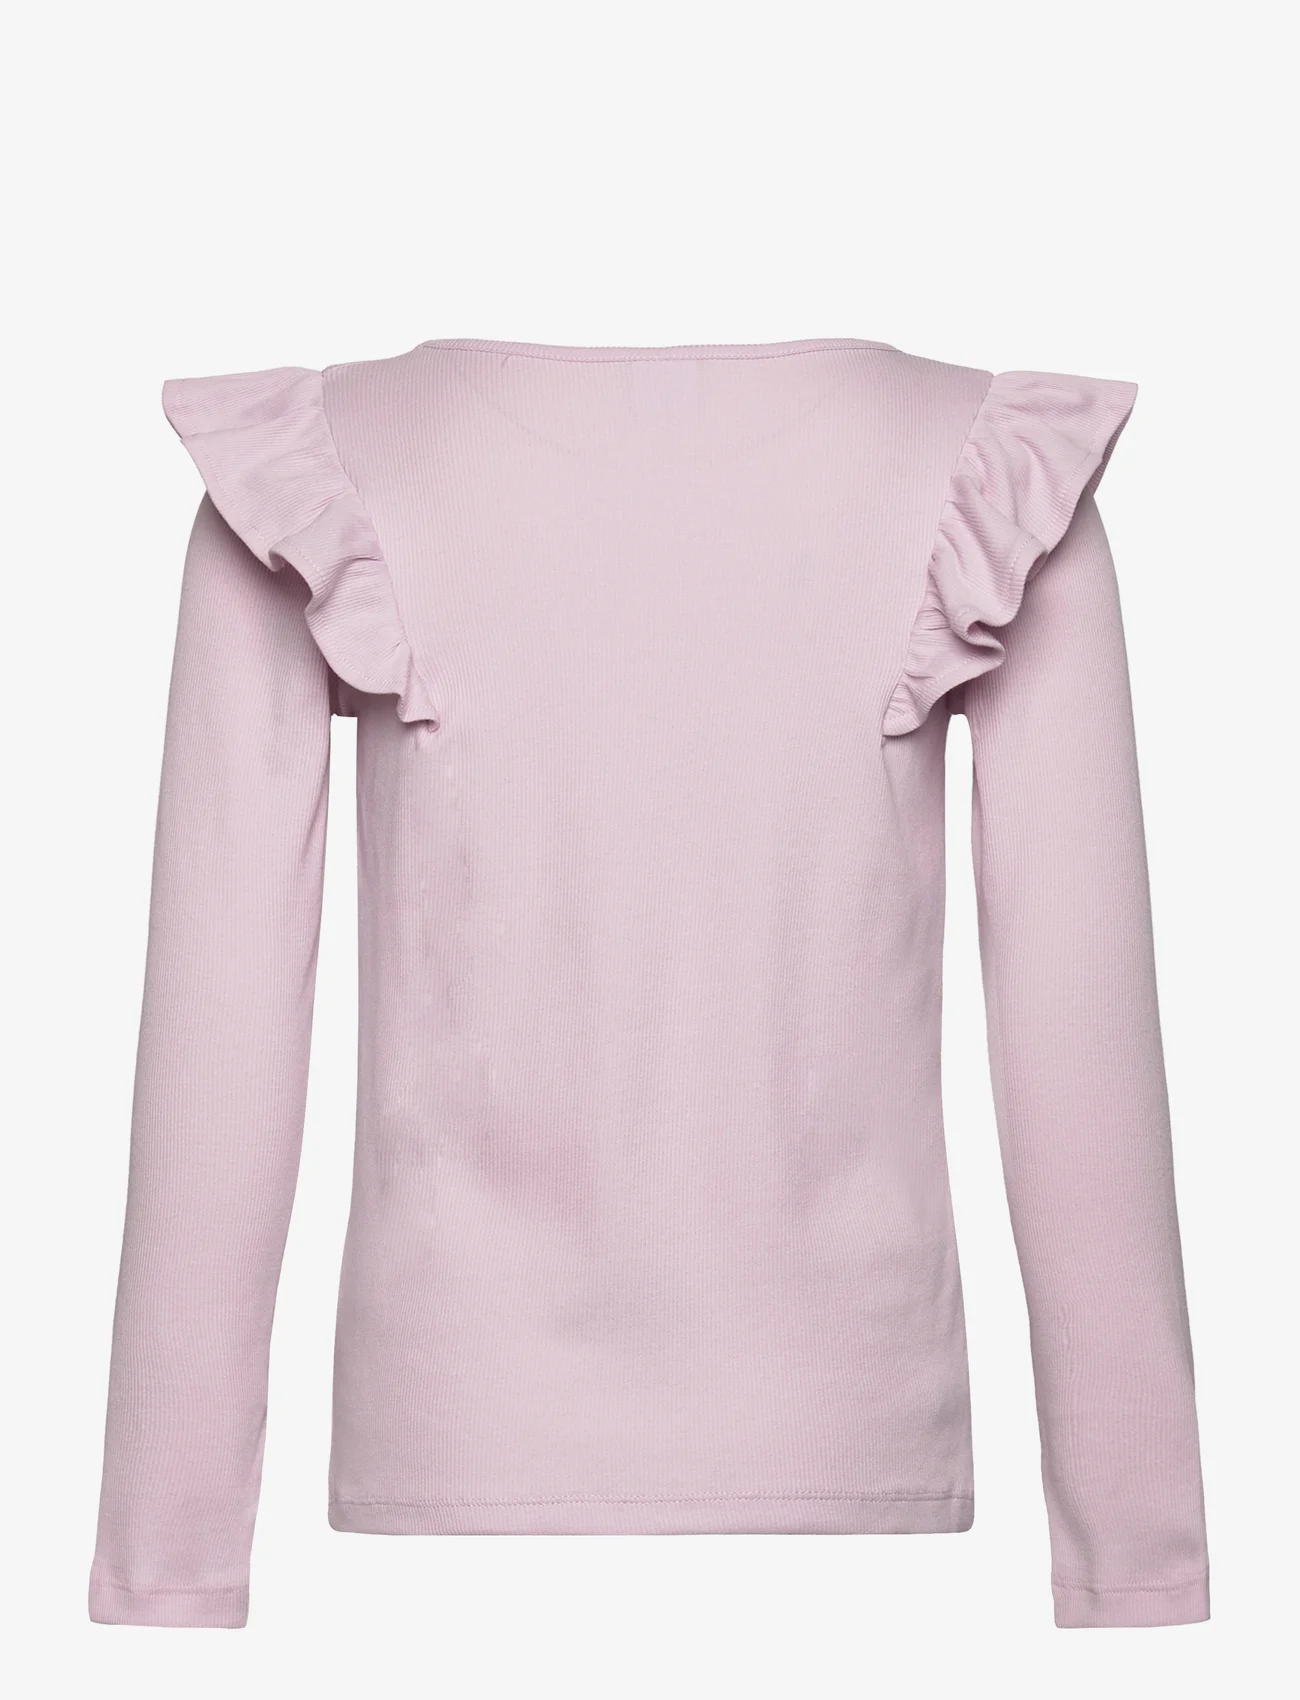 Lindex - Top frill detail solid - langärmelige - dusty pink - 1